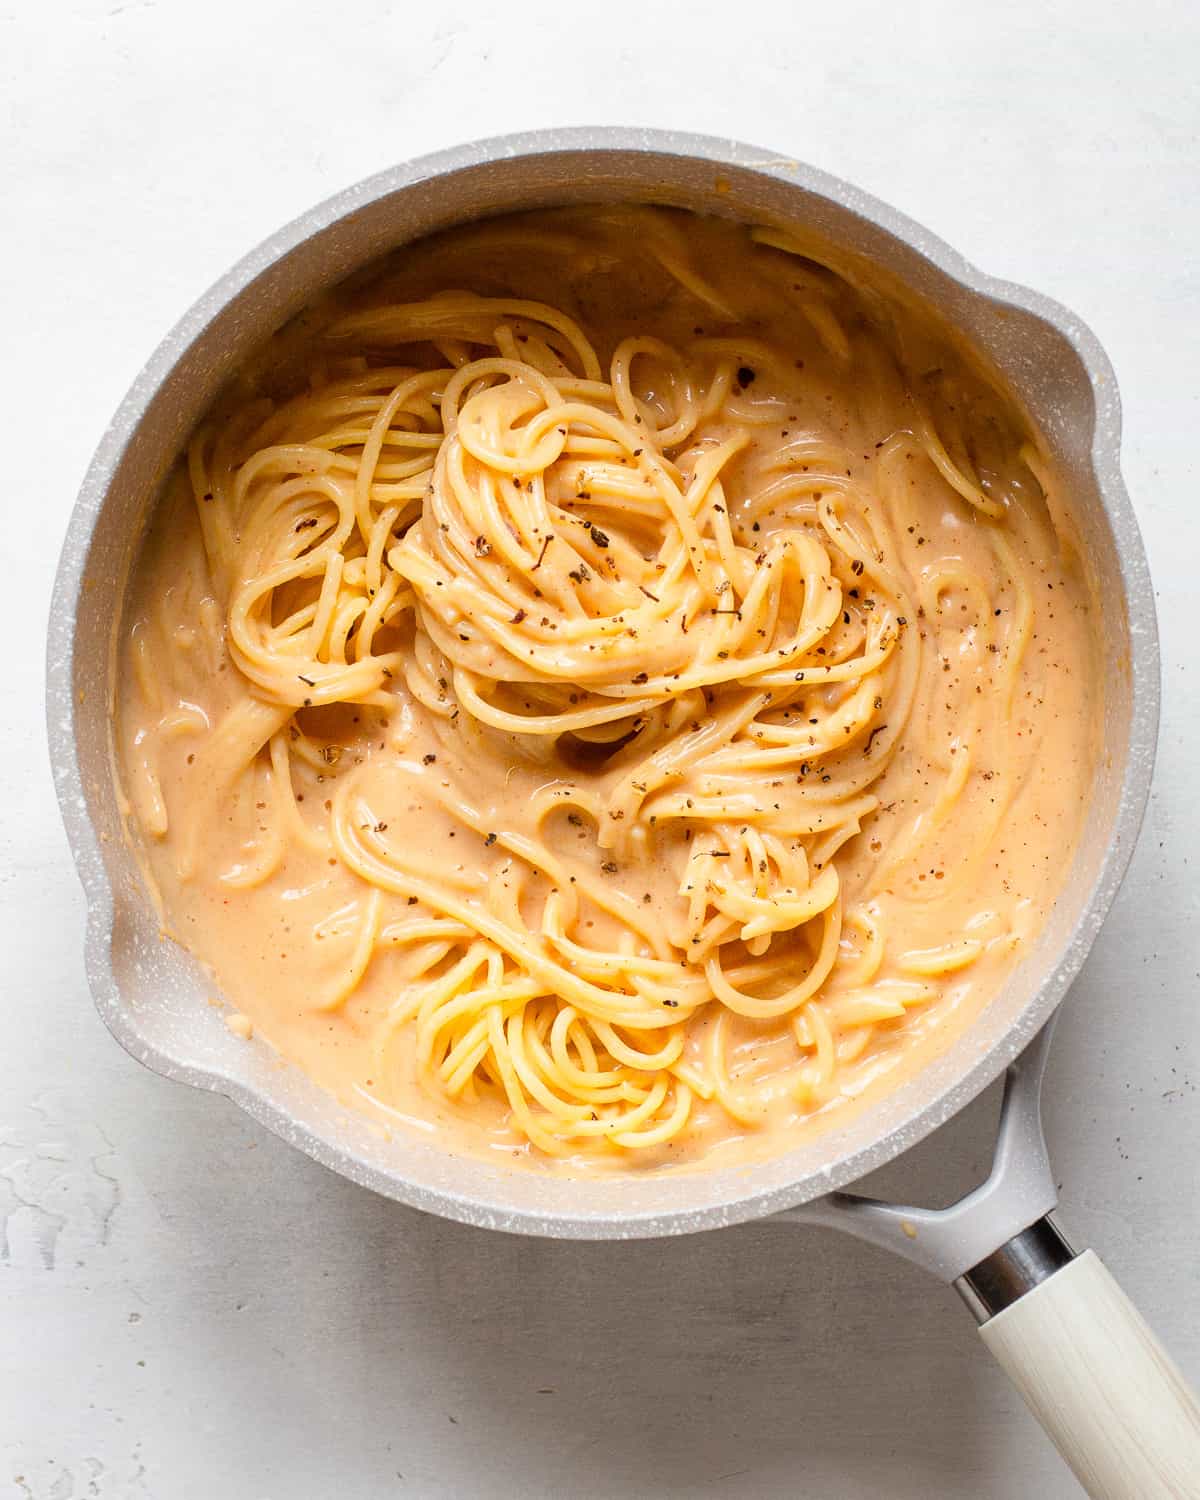 Cooked spaghetti tossed in a light orange sauce in a light grey saucepan.